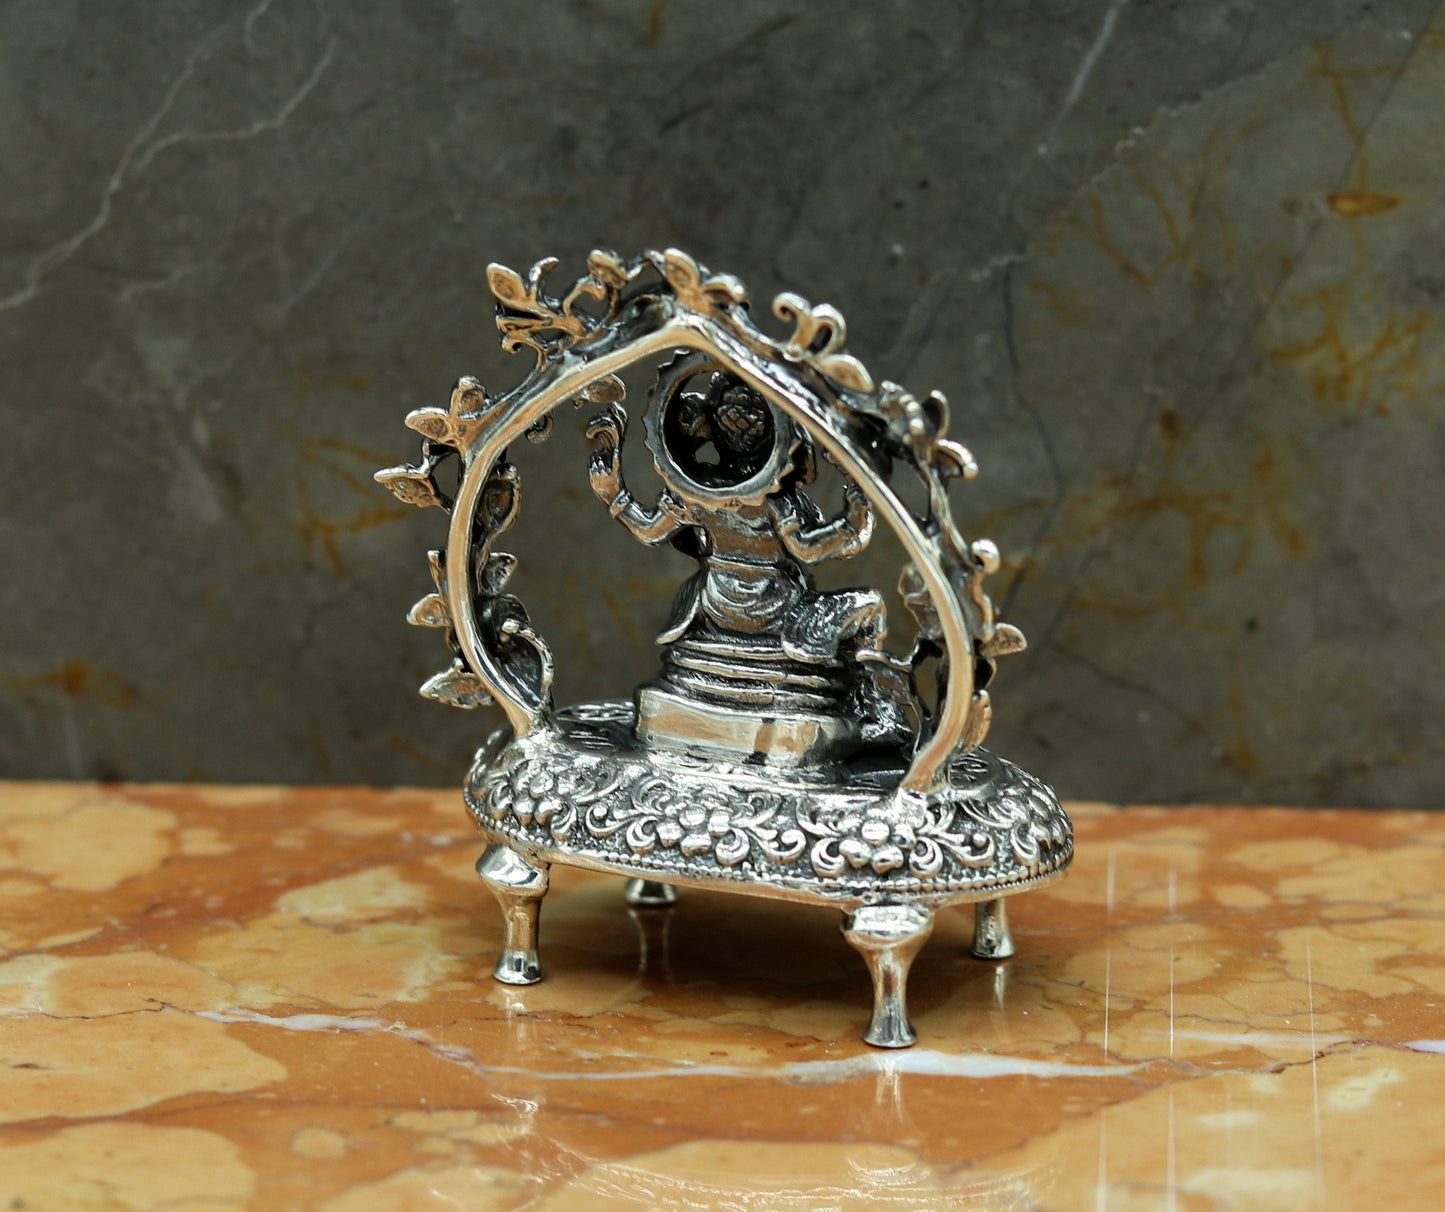 925 Sterling silver Lord Ganesh Idol, Pooja Articles, Indian Silver Idols, handcrafted Lord Ganesh statue sculpture amazing gifting art su03 - TRIBAL ORNAMENTS